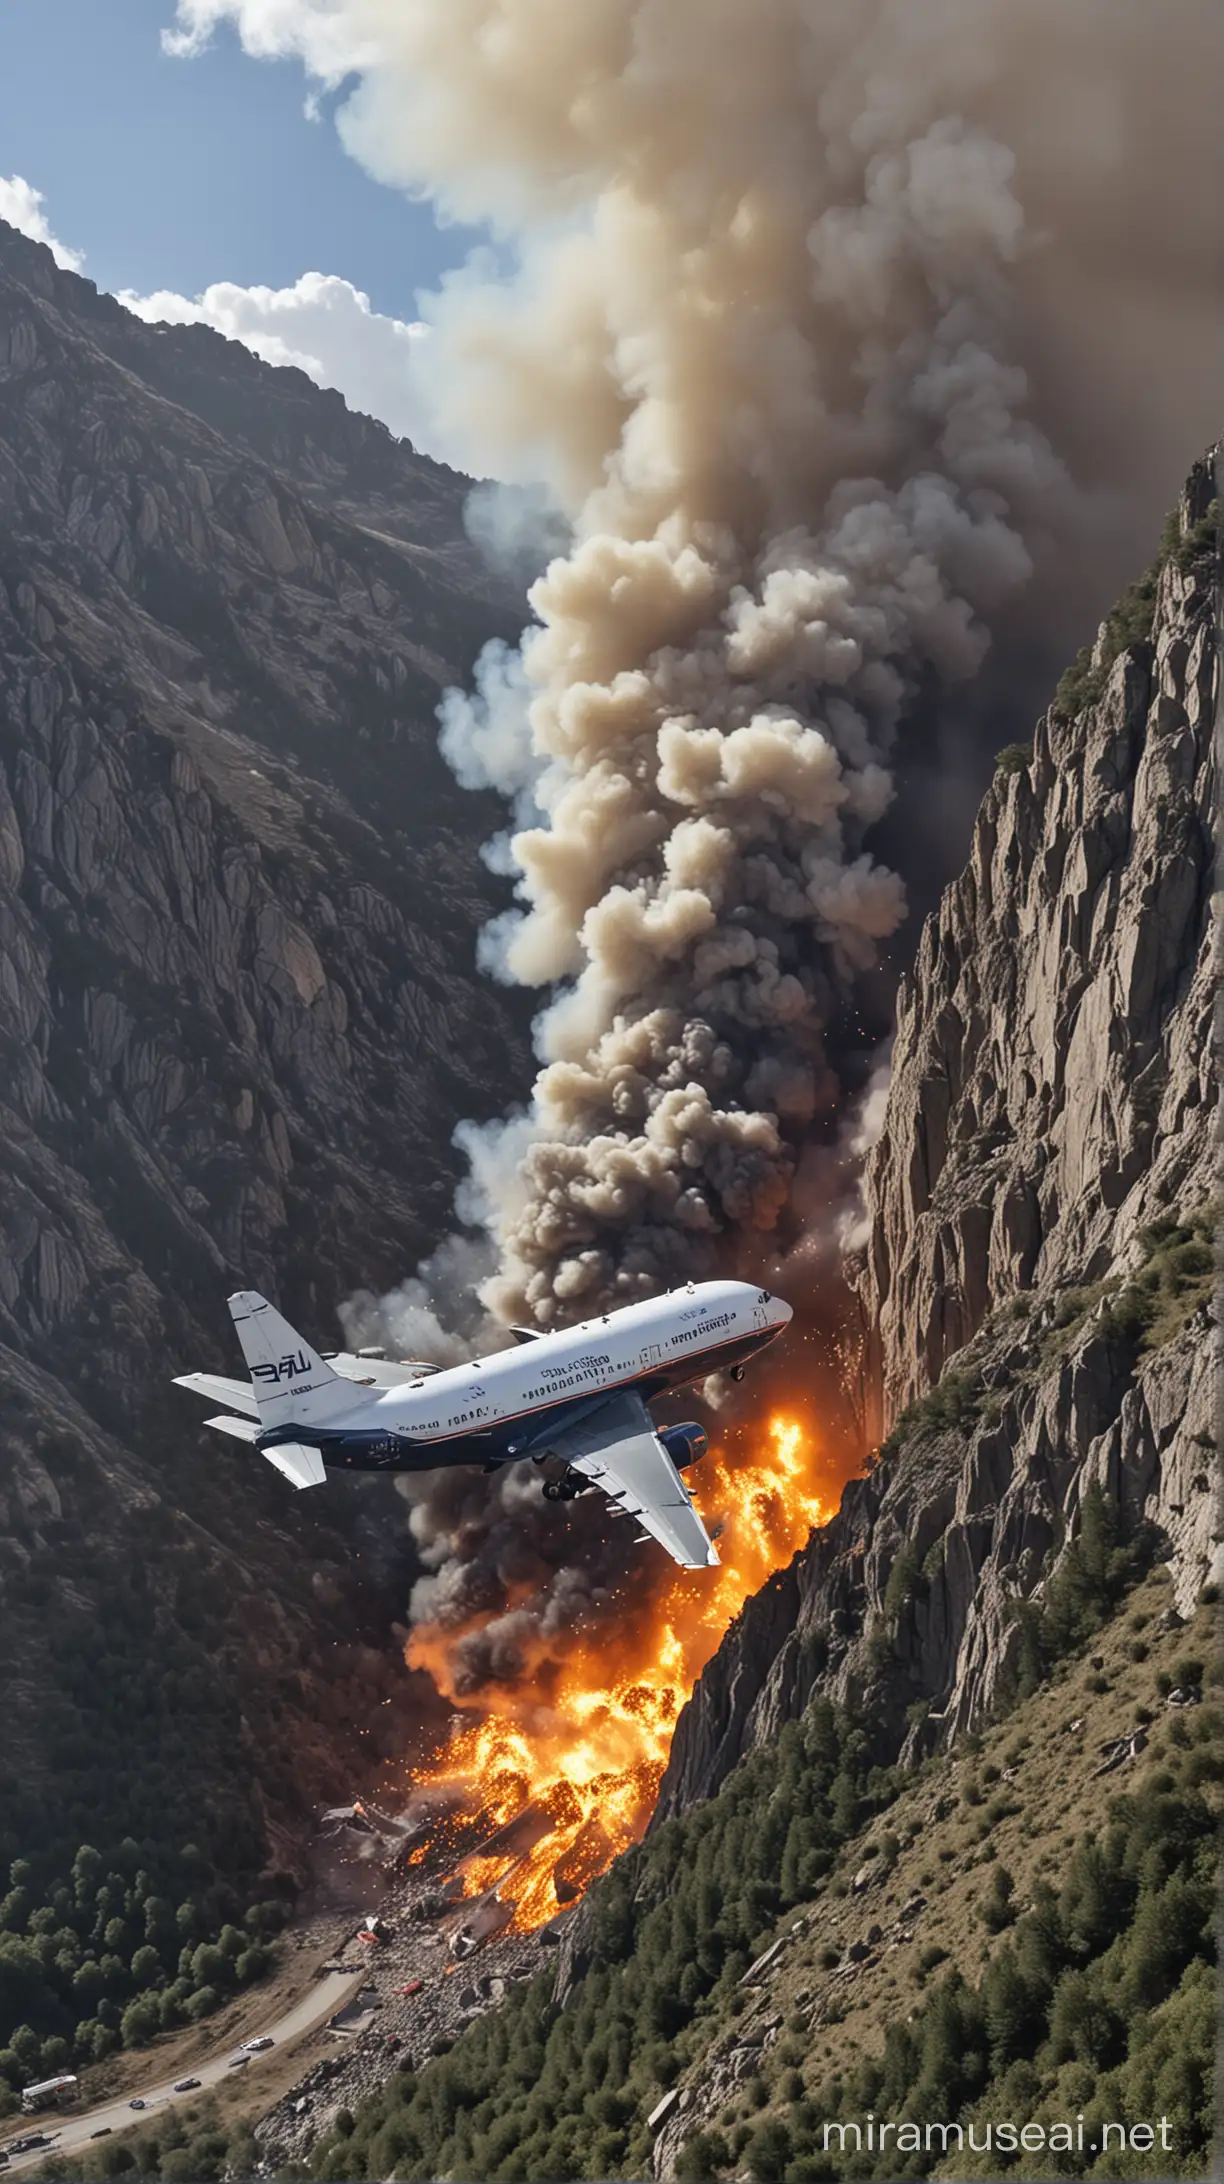 The plane crashed into a mountain and exploded